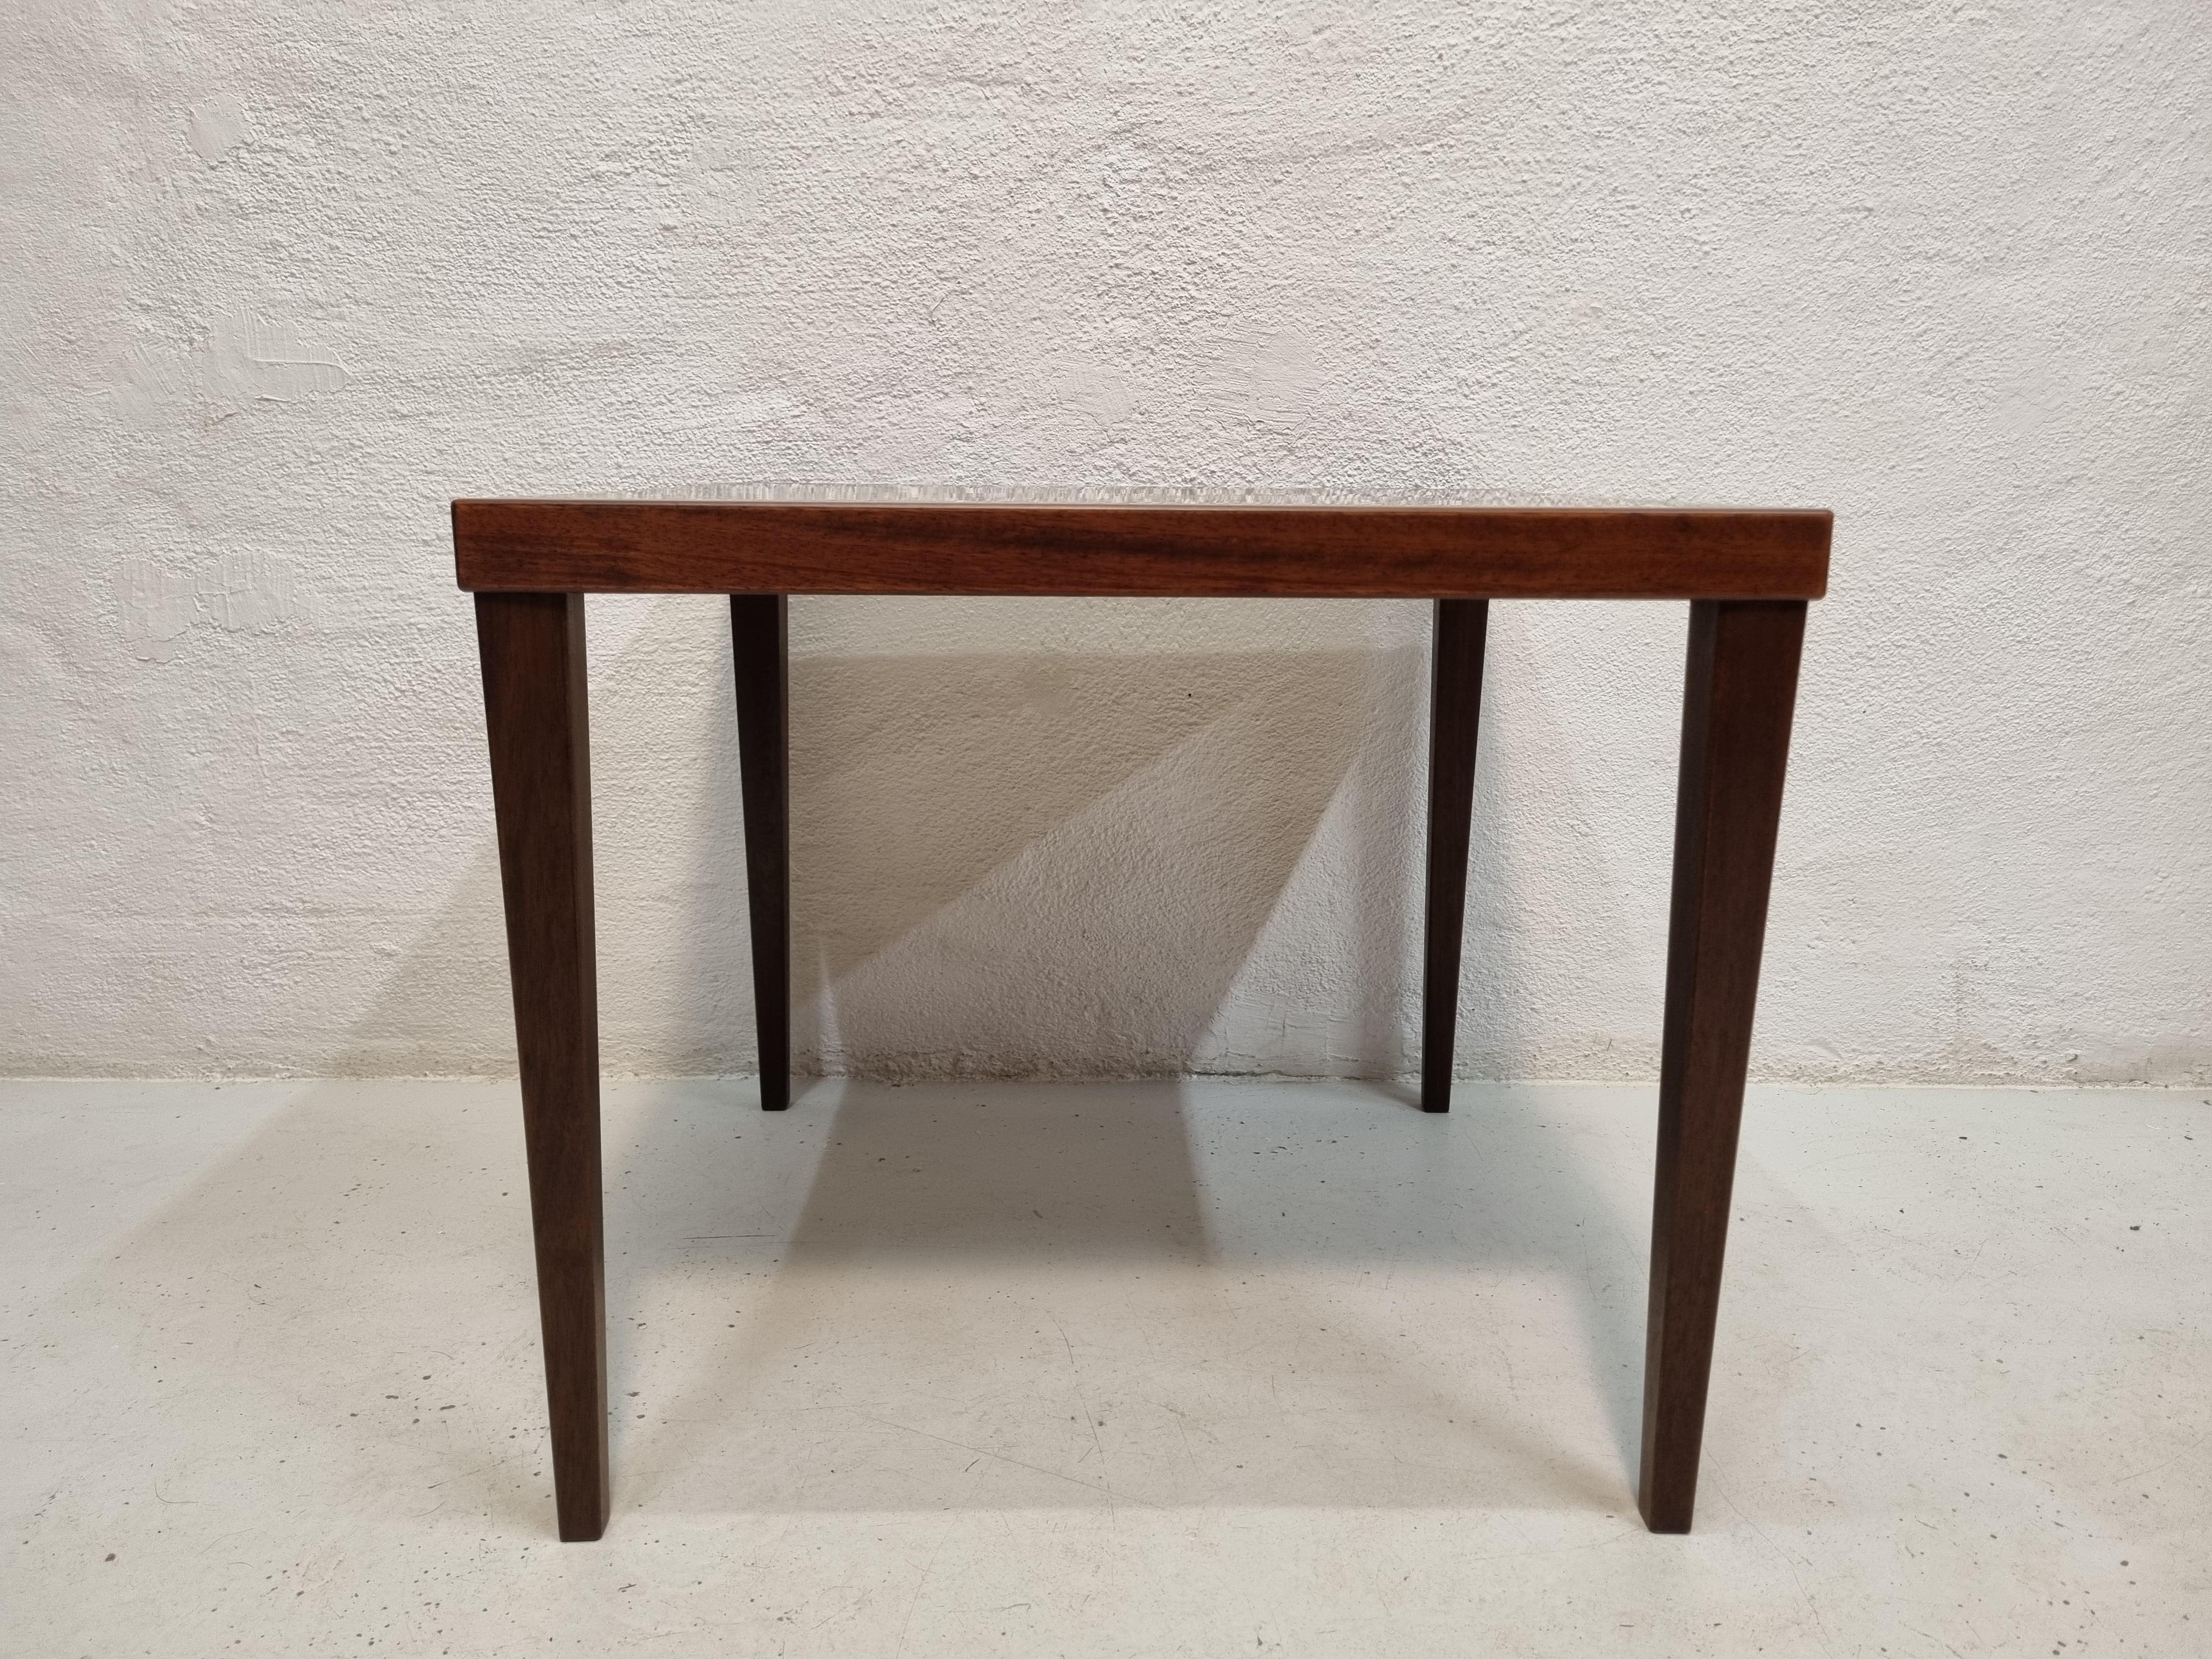 Square rosewood side table, or can also be a small coffee table.
Simple and beautiful design made by a danish furniture maker.